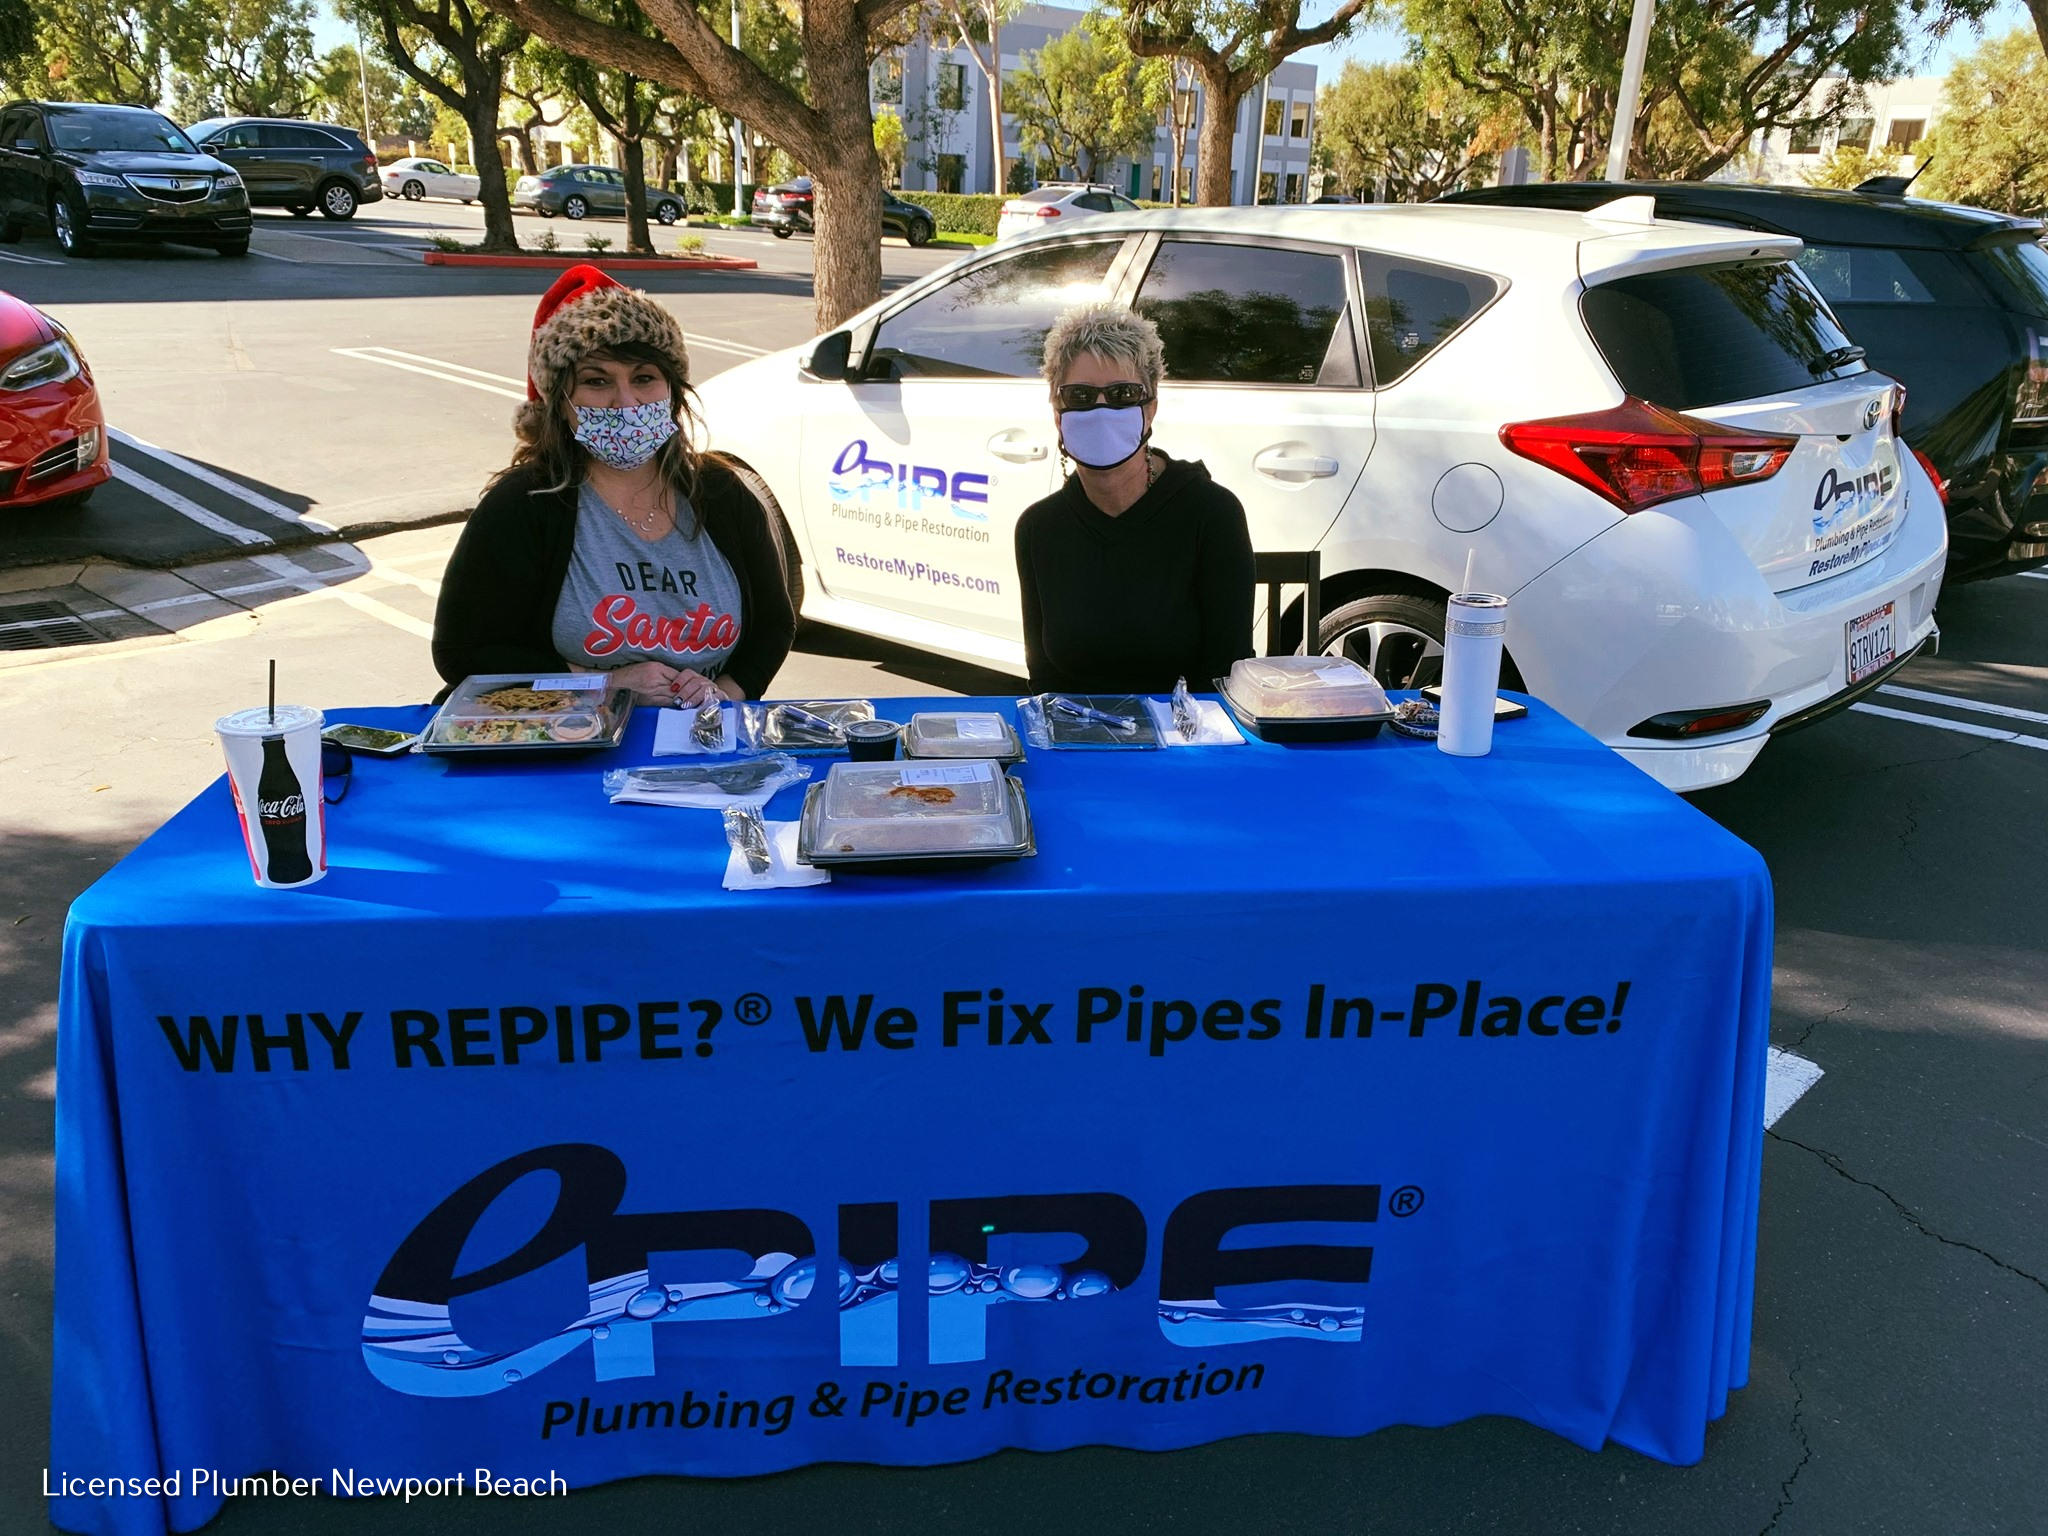 ePIPE - Pipe Restoration Inc. Explains What Makes Them the Leading the Repipe Company